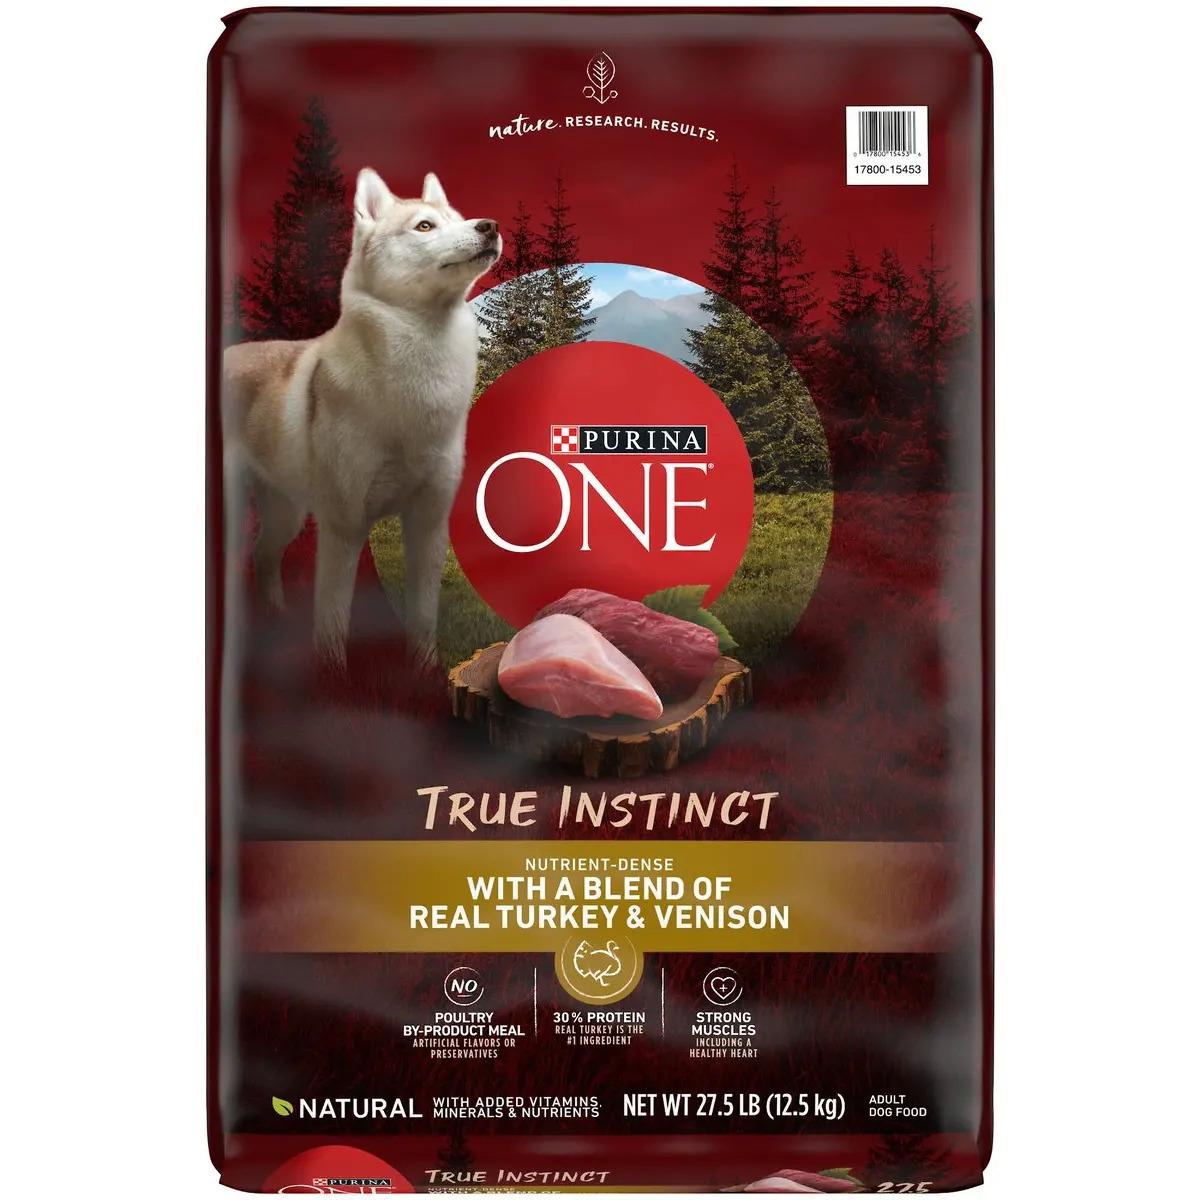 Purina ONE Natural True Instinct High Protein Dry Dog Food for $27.17